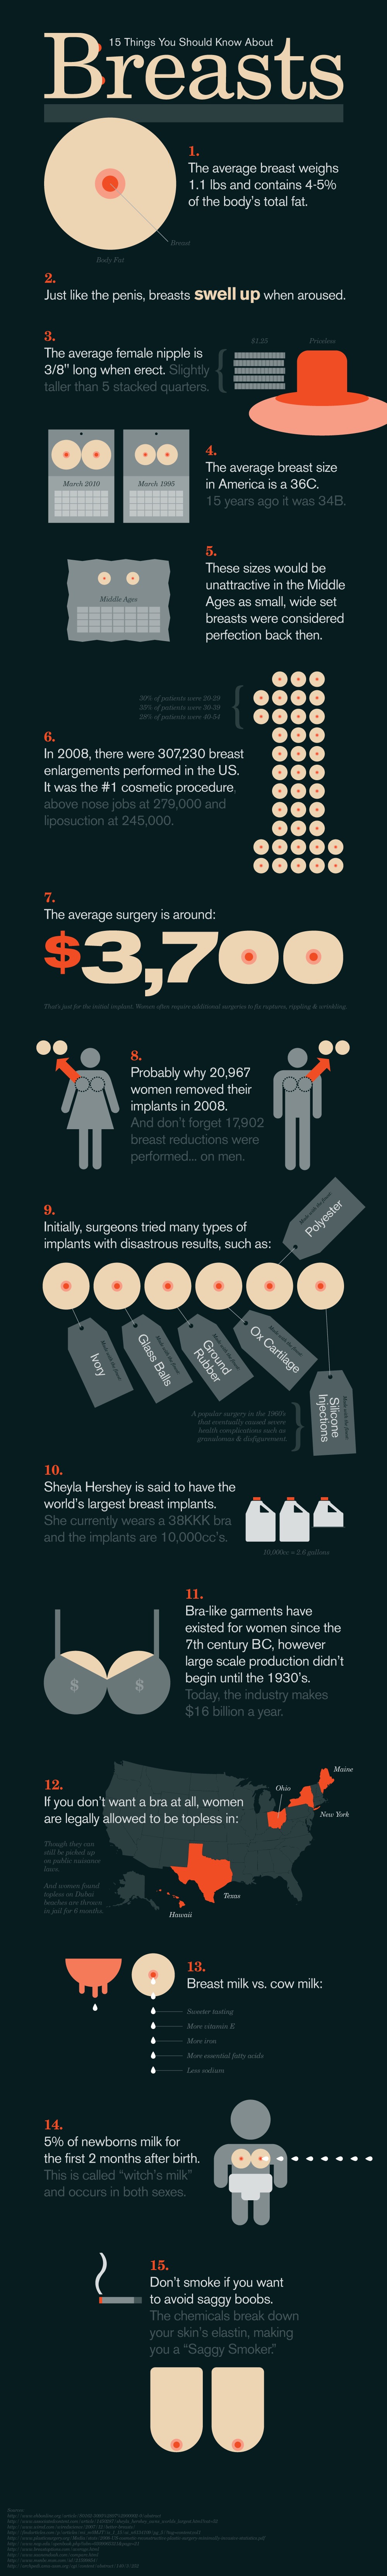 breasts infographic